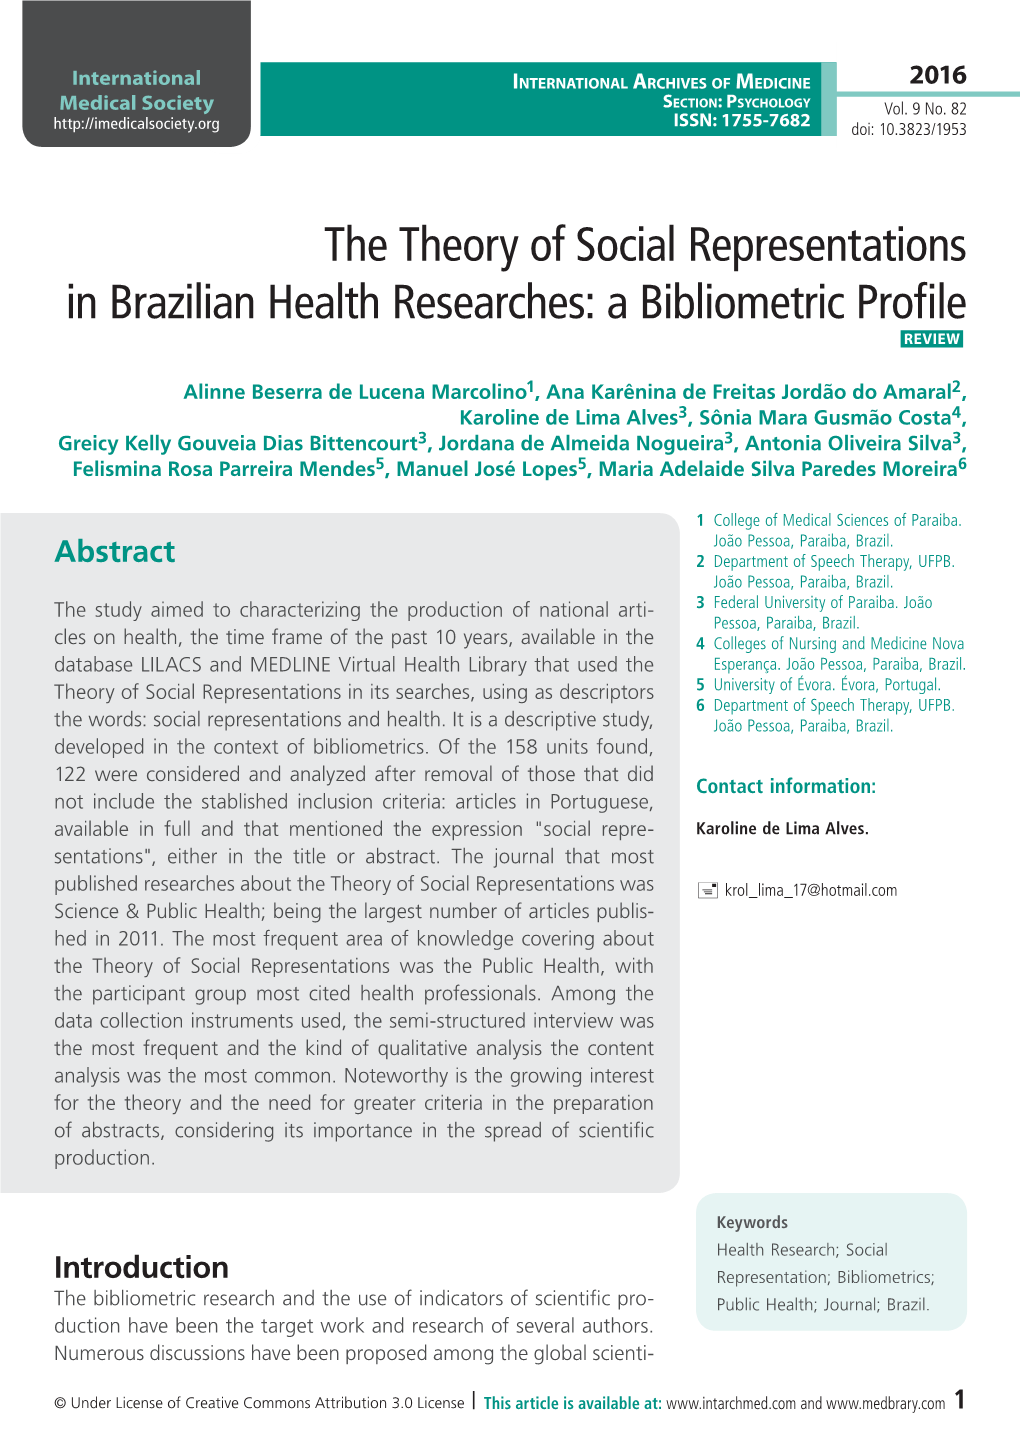 The Theory of Social Representations in Brazilian Health Researches: a Bibliometric Profile Review